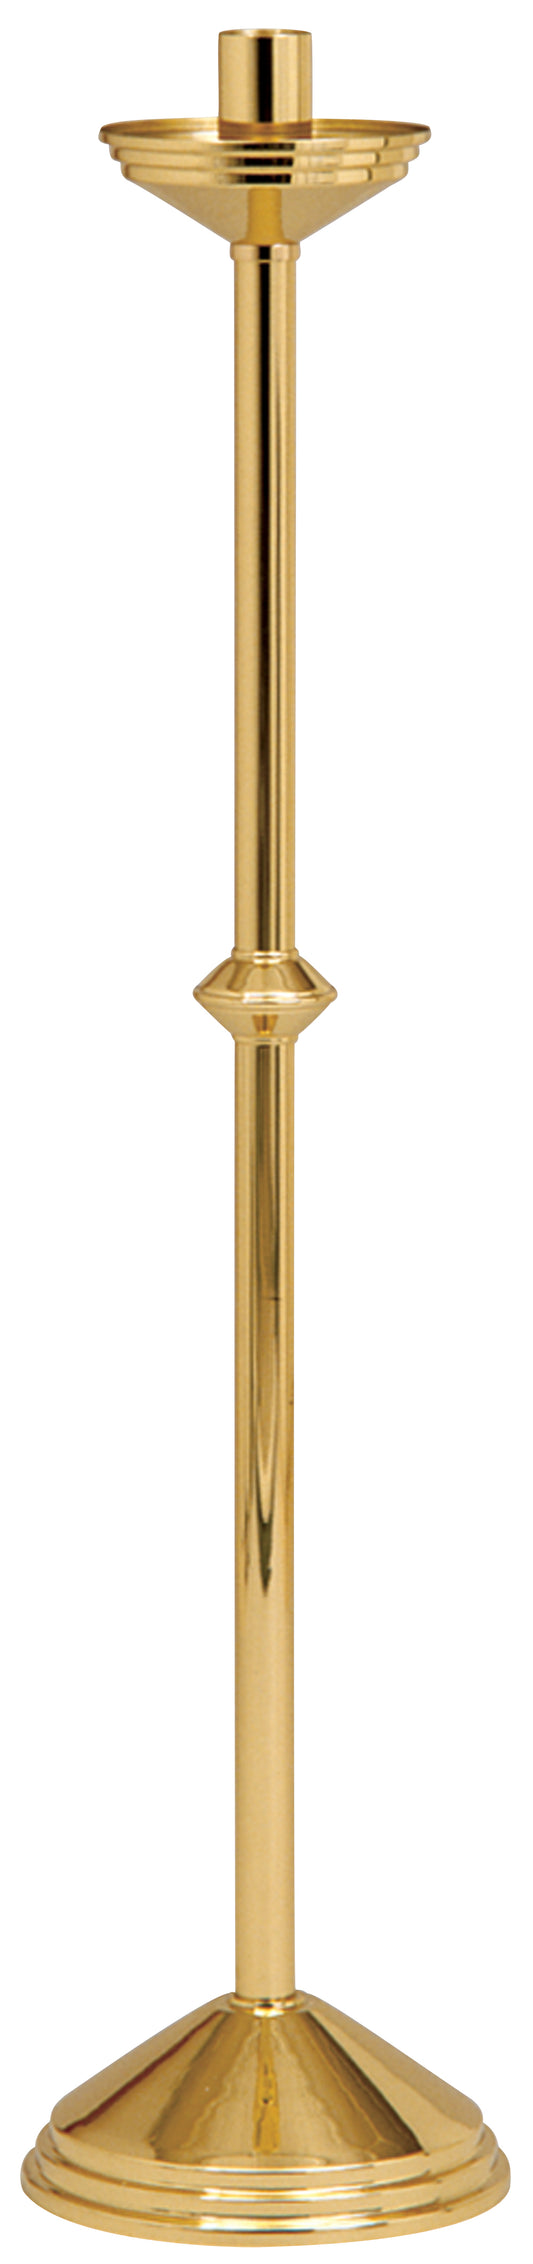 Paschal Candle Holder - K485